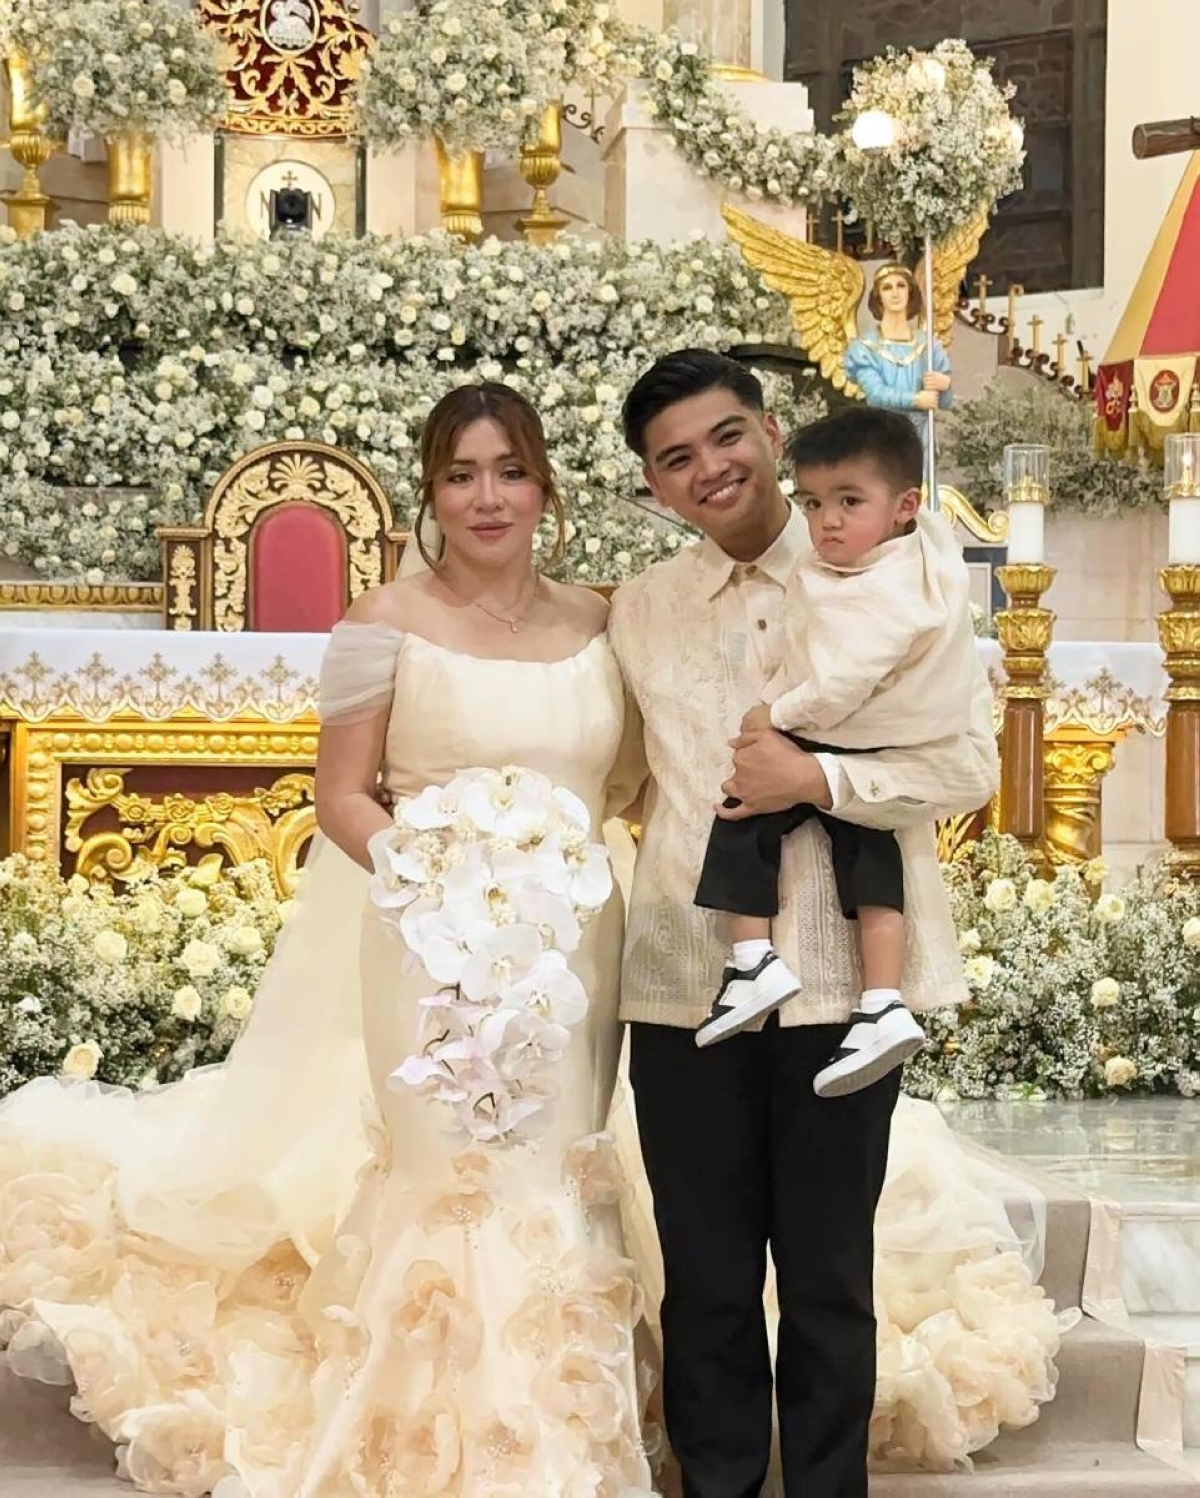 FAMILY OF THREE Angeline Quinto, husband Nonrev Daquina and son Sylvio who acted as ring bearer INSTAGRAM PHOTO/CHAROSANTOS